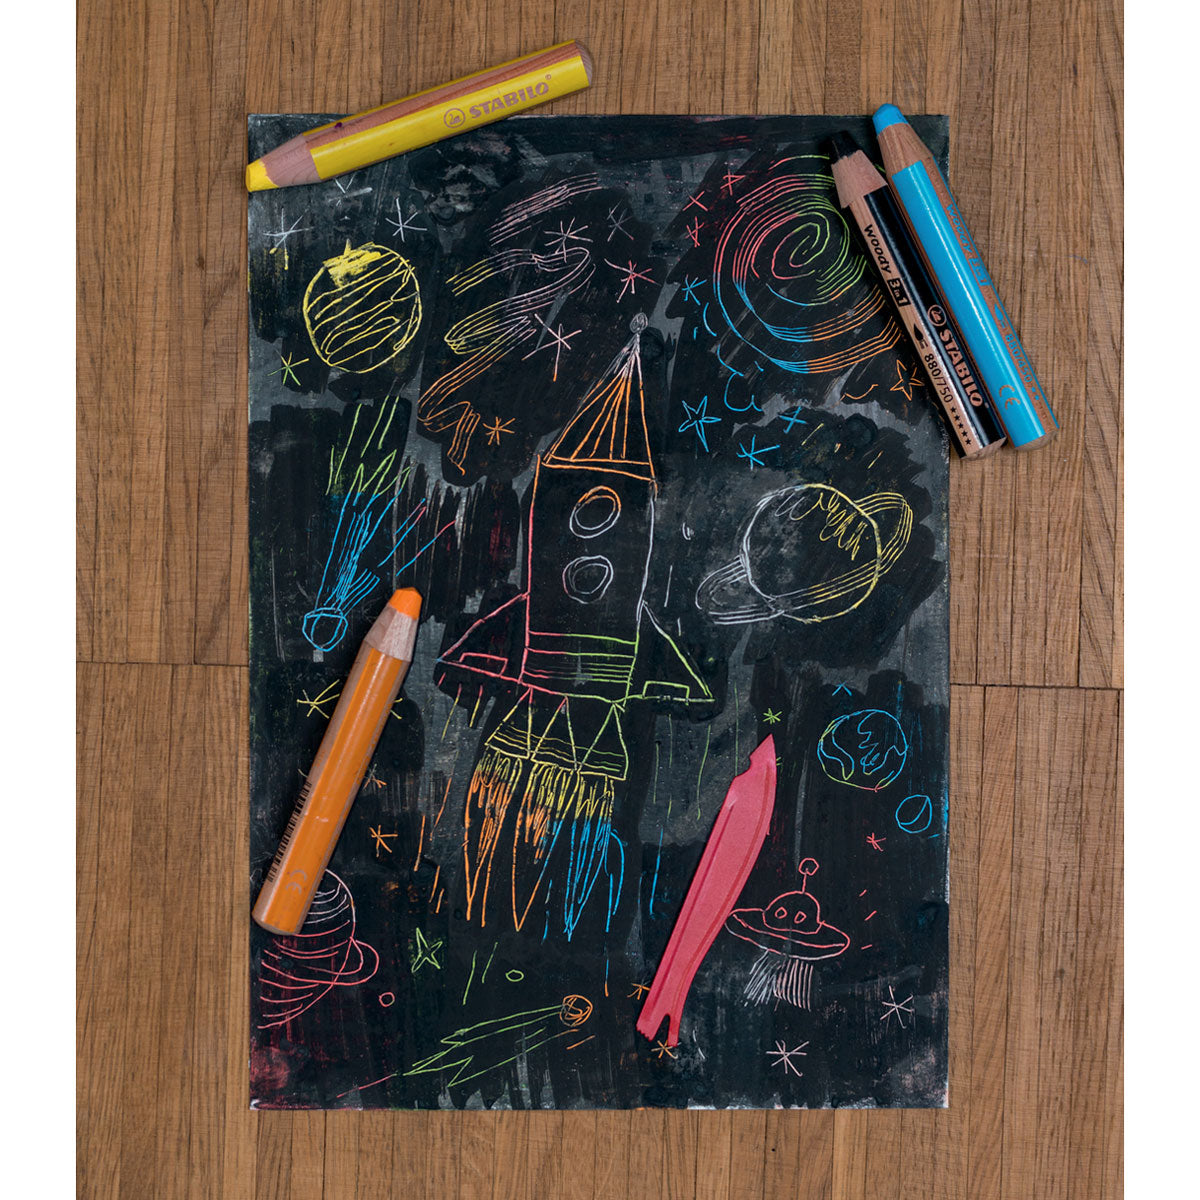 Wooden floor background with a black chalk picture of  a rocket in space with stars, planets, comets, and a UFO. A variety of colors come through the scratched canvas paper. Four Stabilo pencils in yellow, orange, blue, and black placed on top of the picture along with a scraping tool.